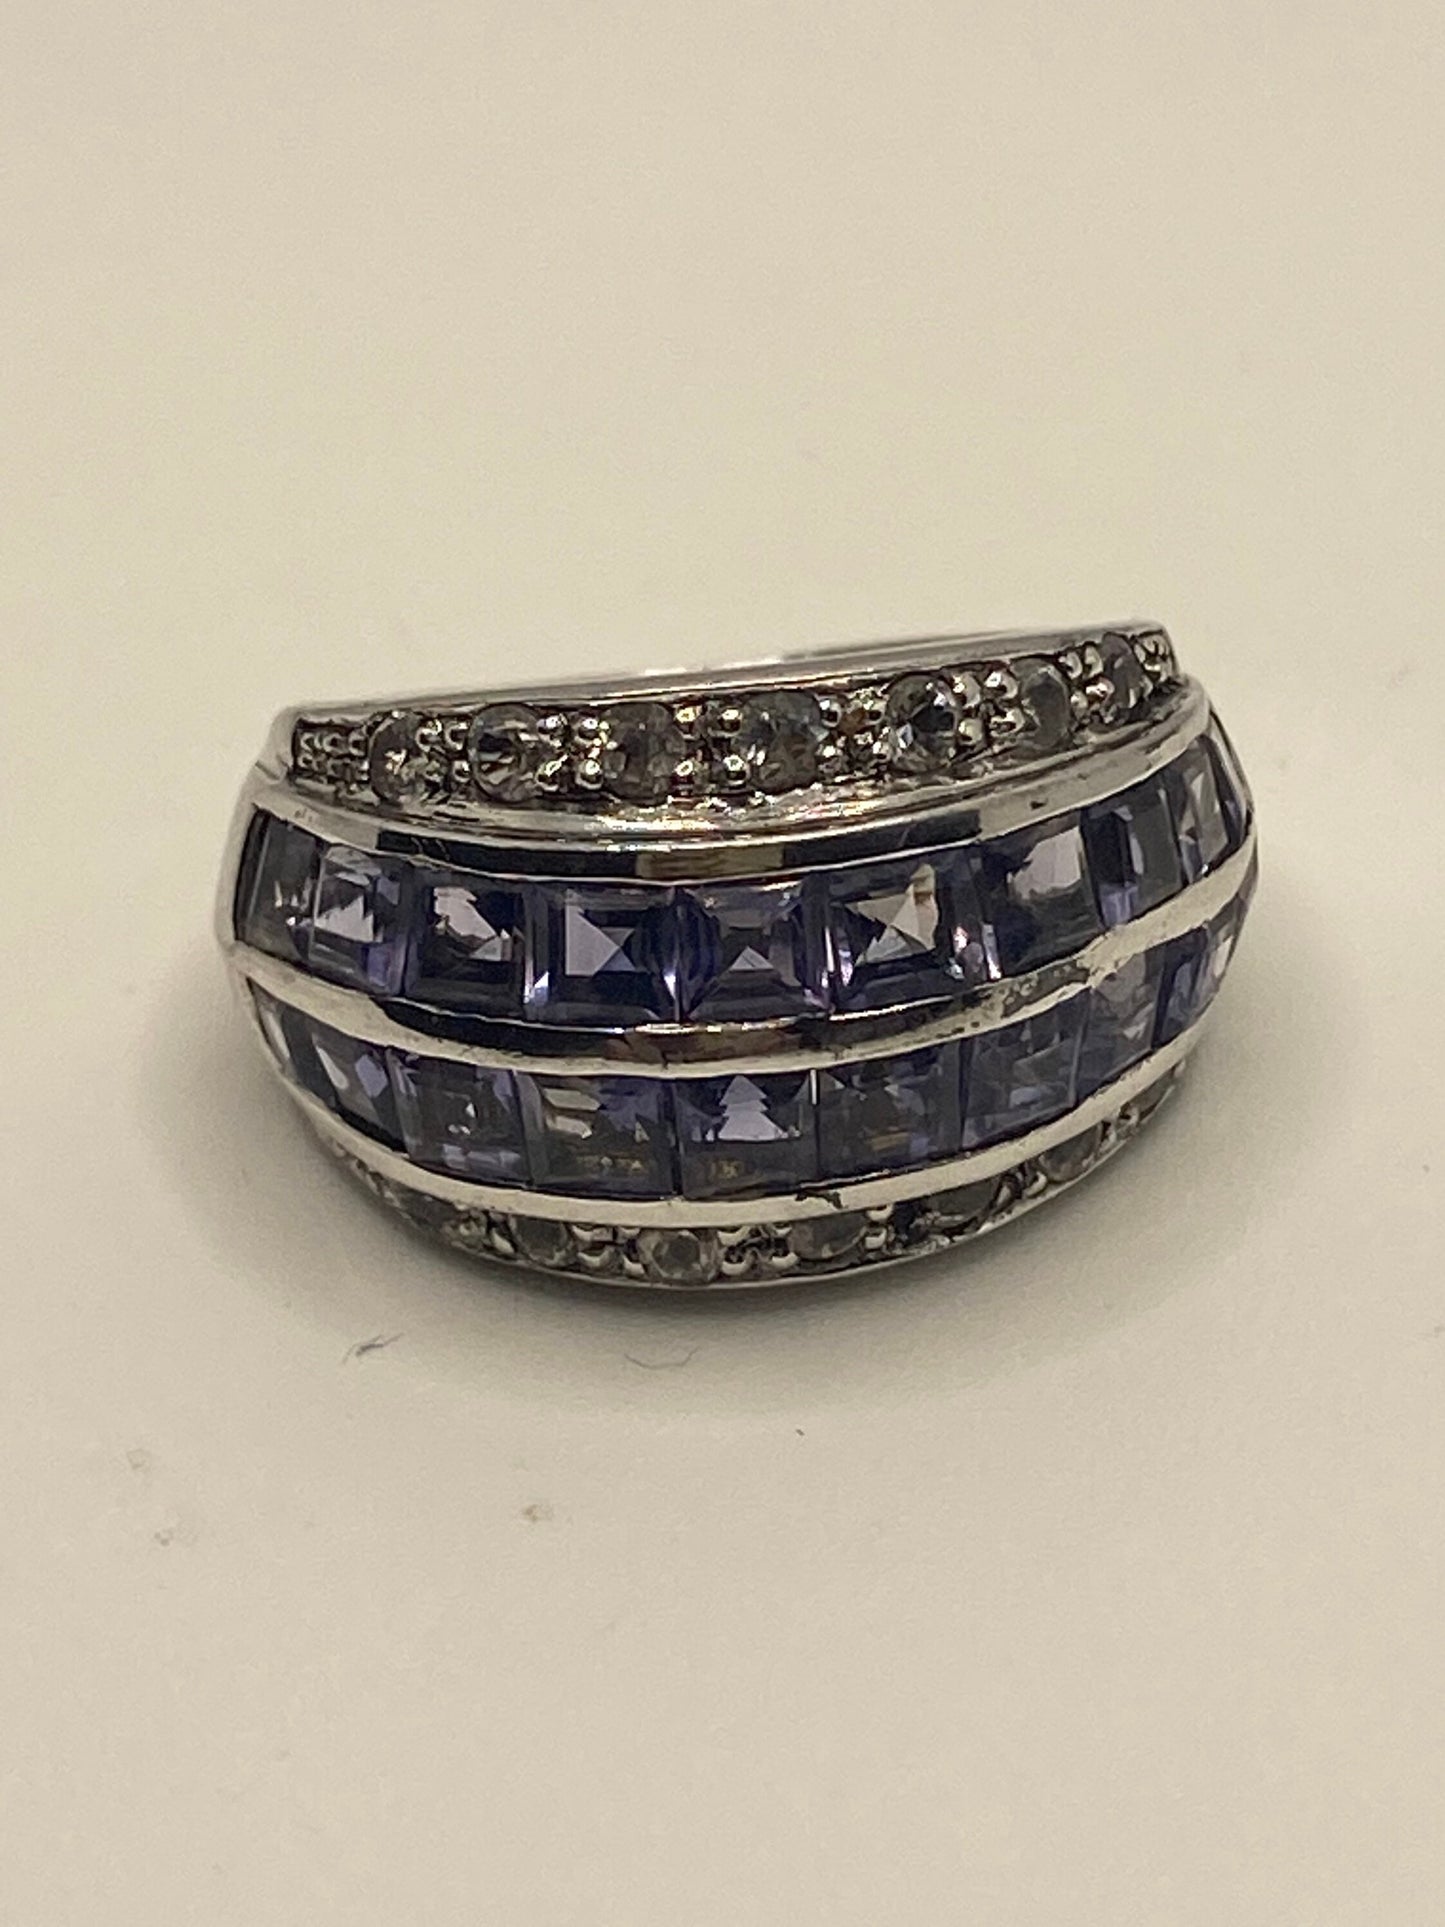 Vintage Handmade Deep Blue Iolite Setting 925 Sterling Silver Gothic Ring size 7